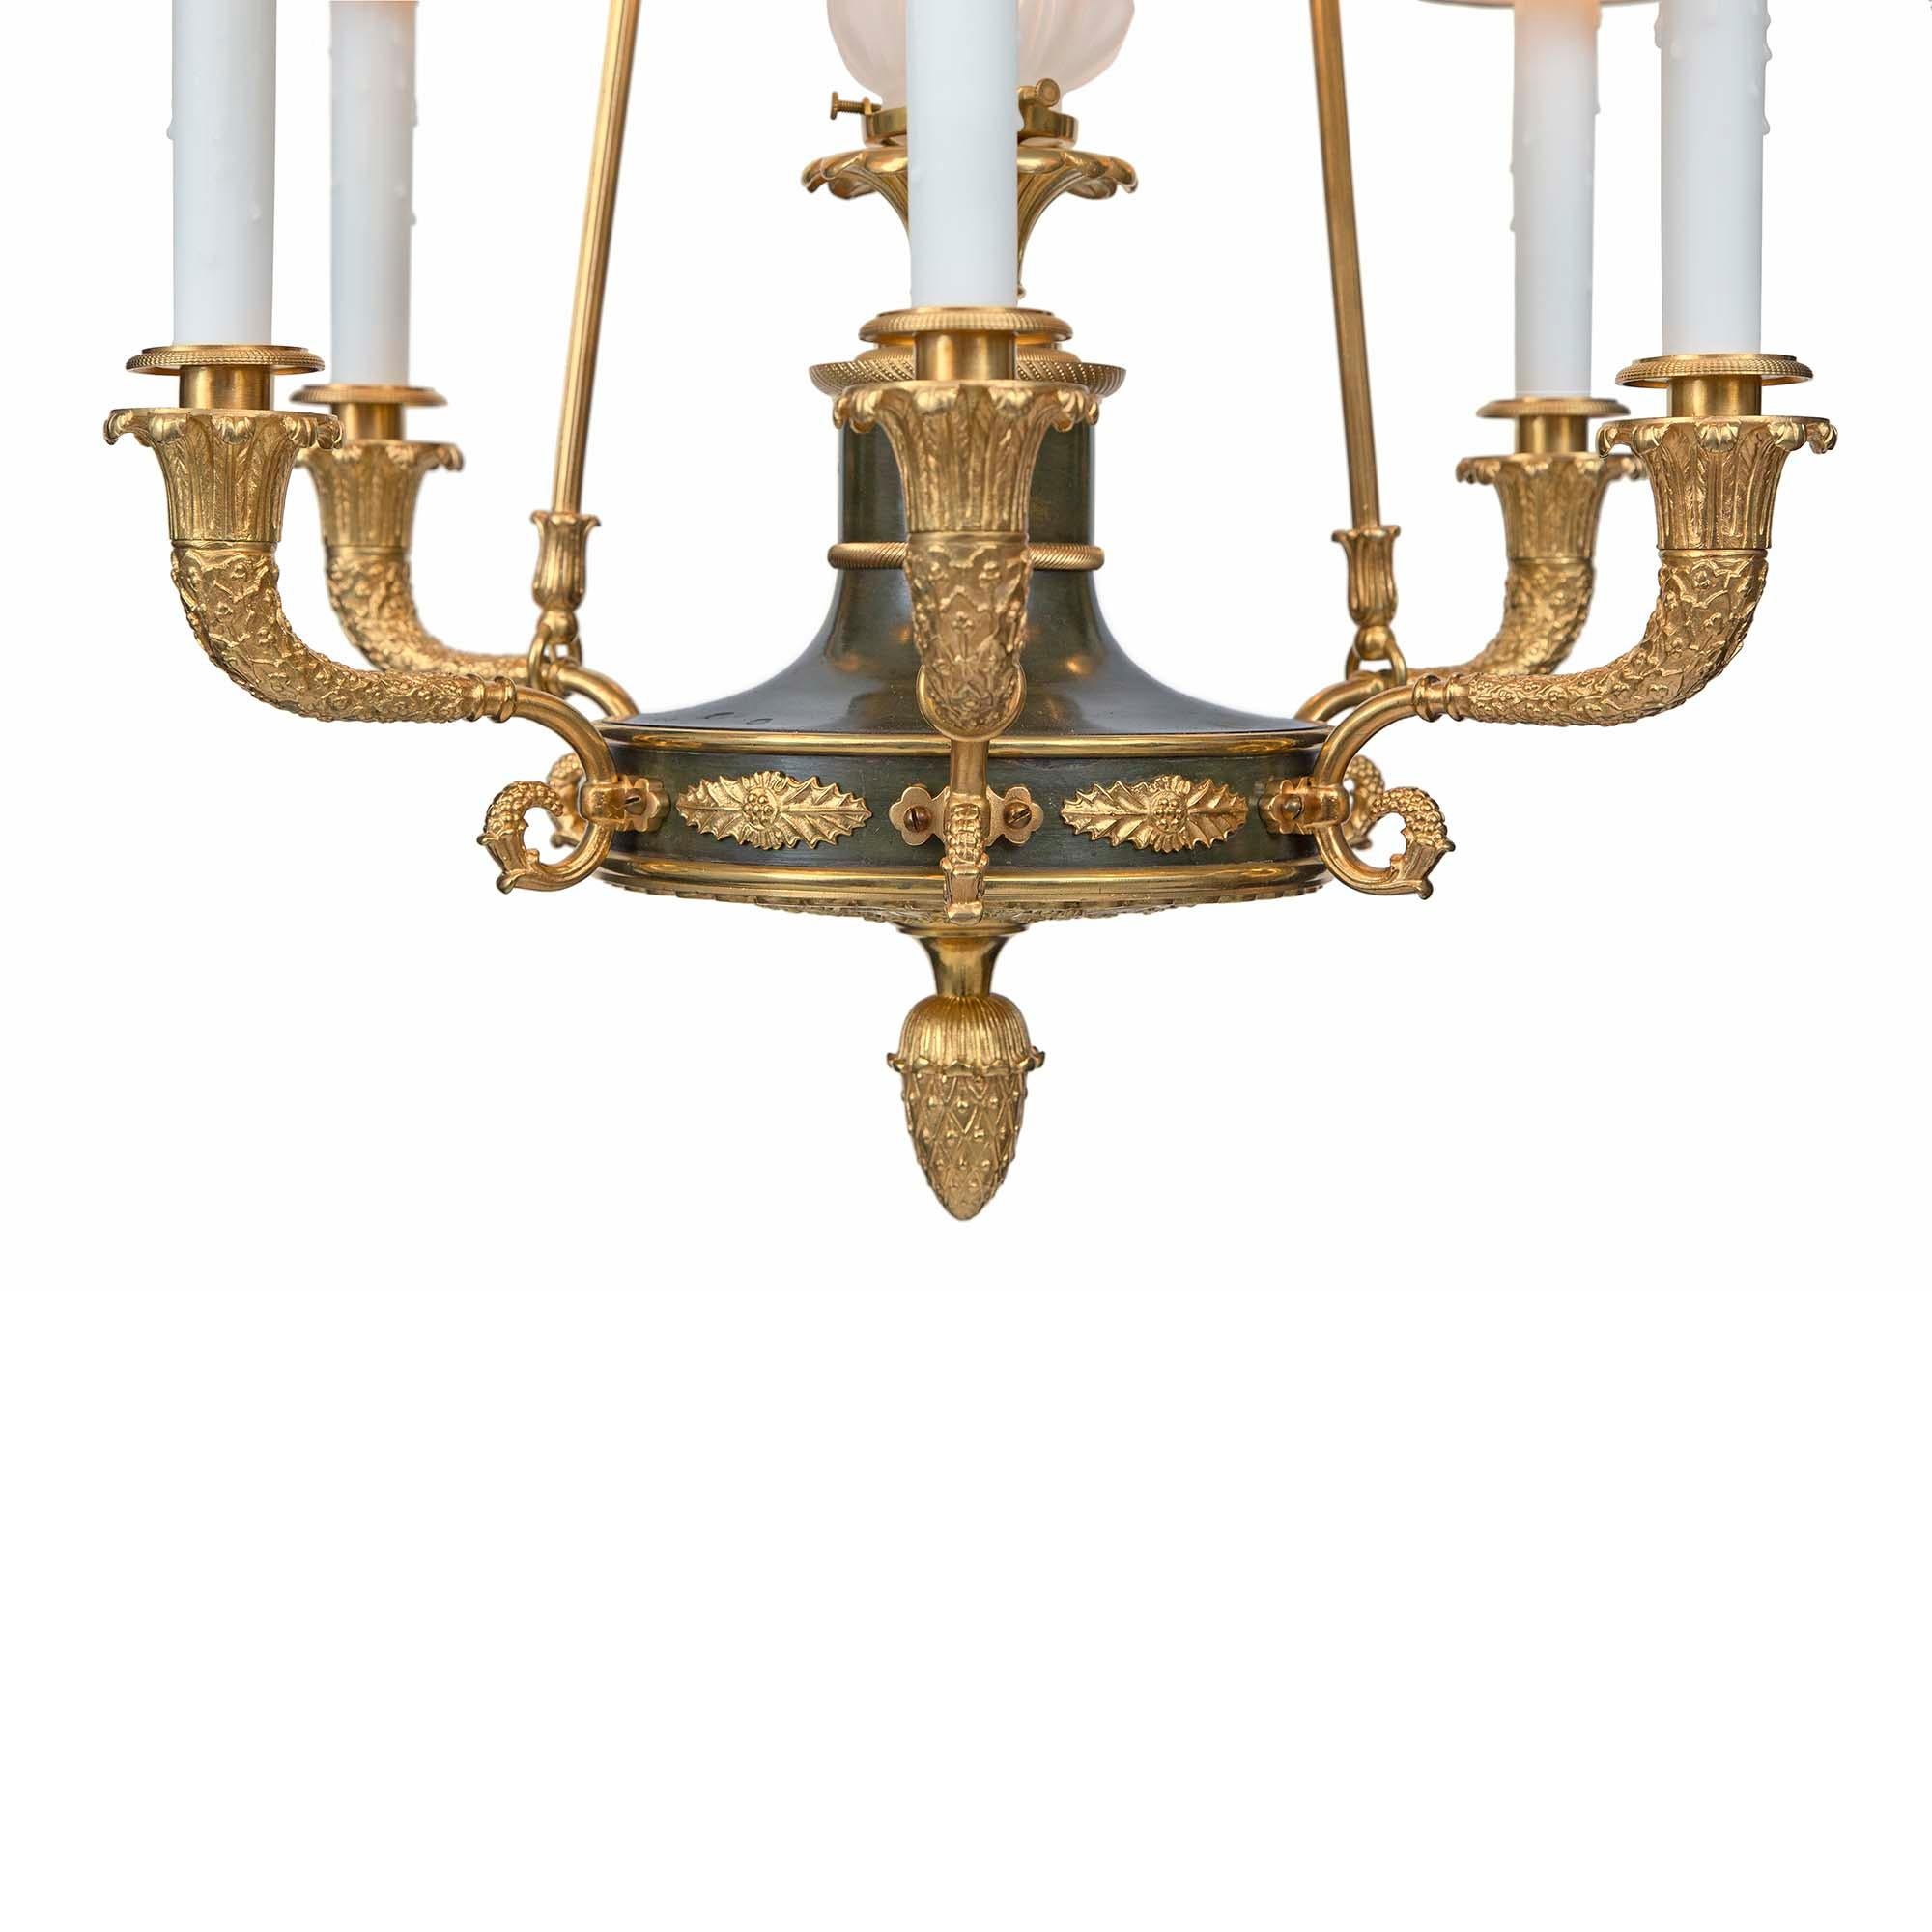 French 19th Century Empire Style Bronze and Ormolu Seven-Light Chandelier For Sale 2